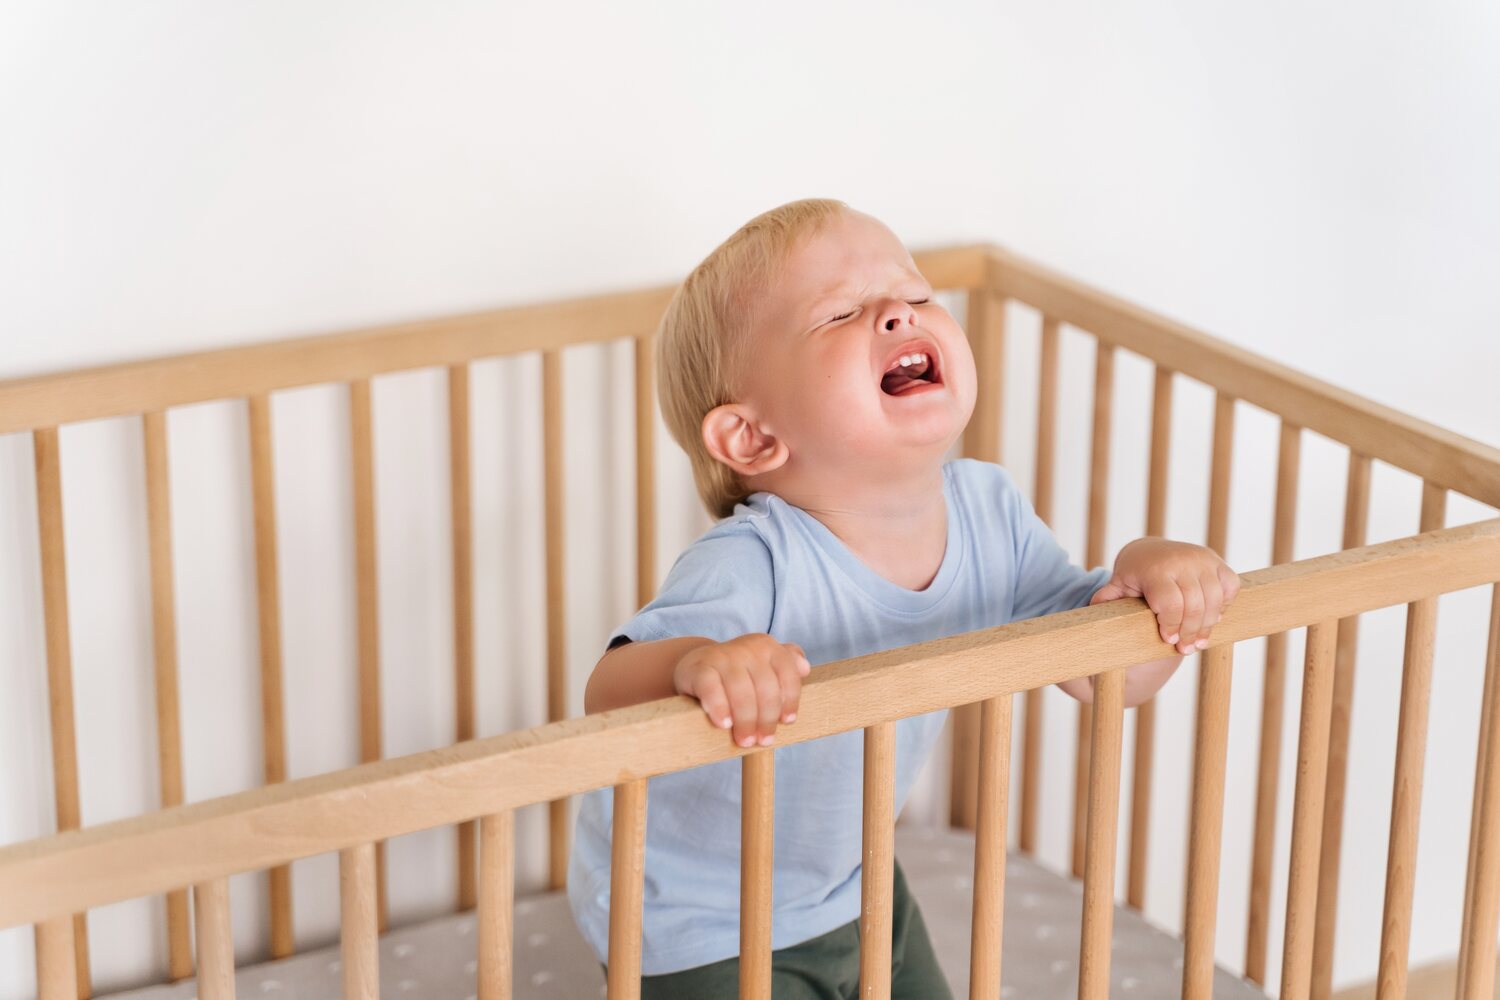 Toddler wants to sleep and cannot do so on their own can trigger tantrum